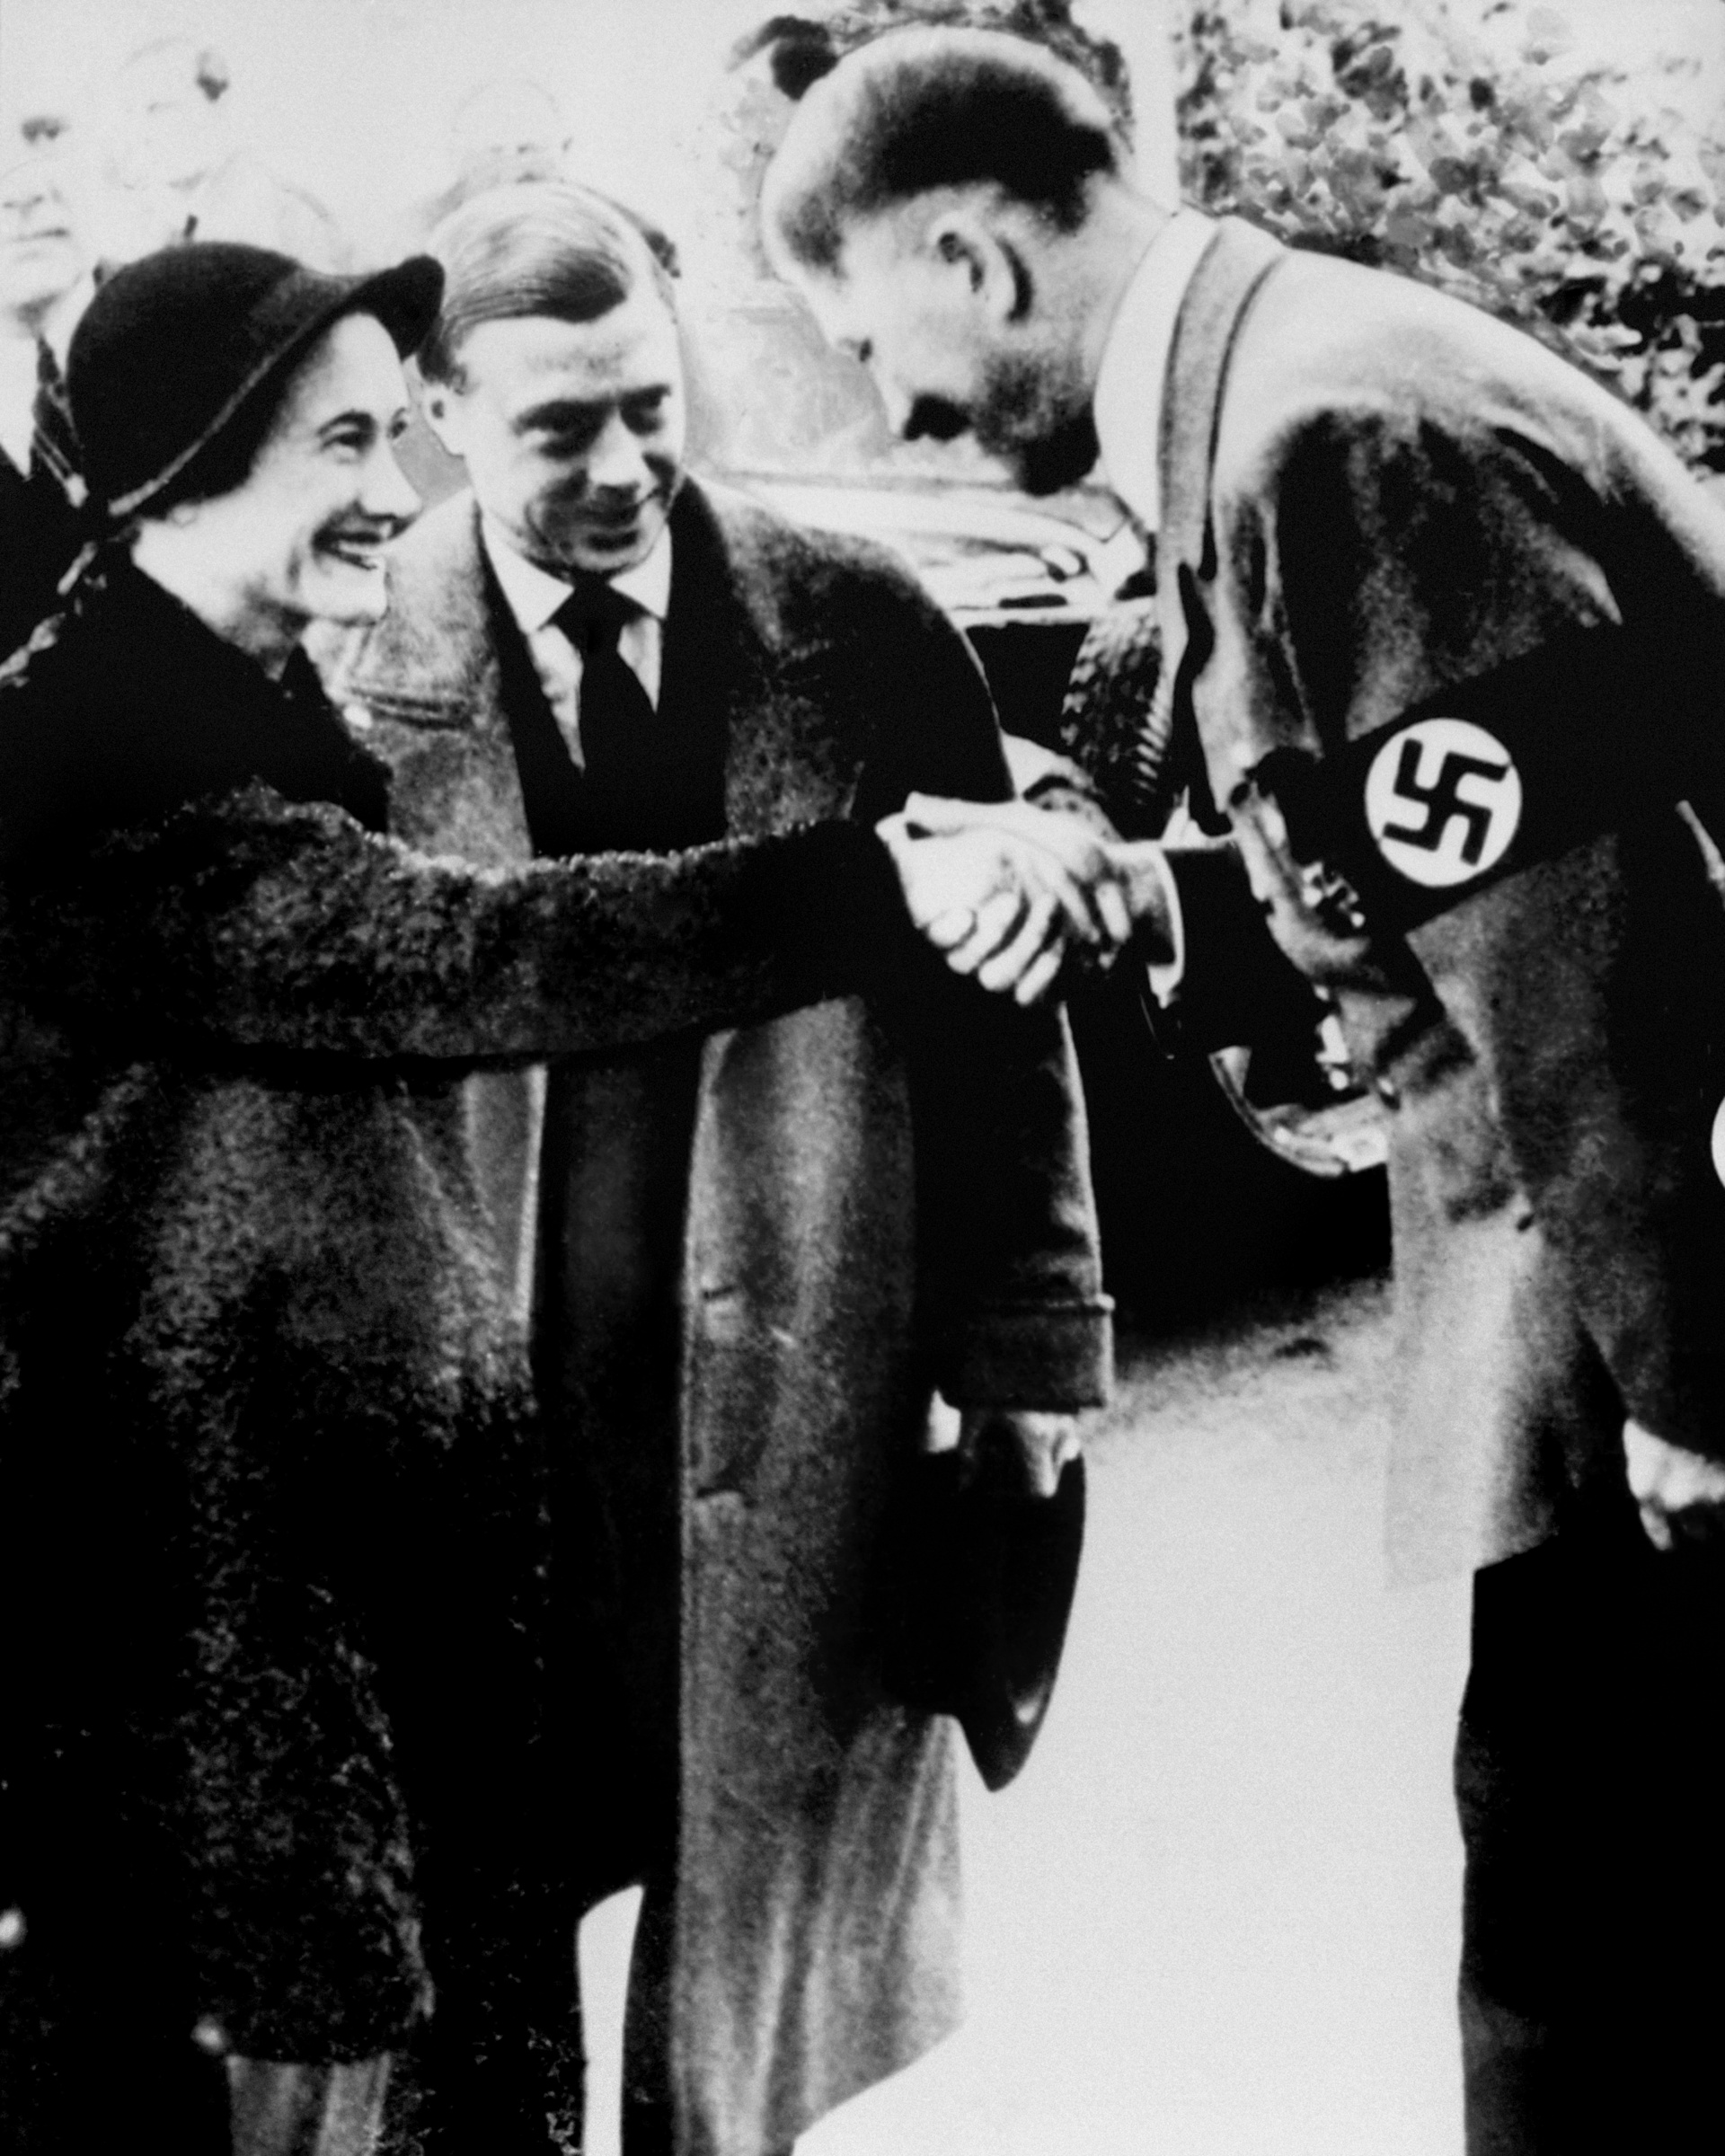 The Duke and Duchess of Windsor at their controversial meeting with German leader Adolf Hitler in Munich, 1937. Secret documents revealed the state considered the Prince to be pro-Nazi.